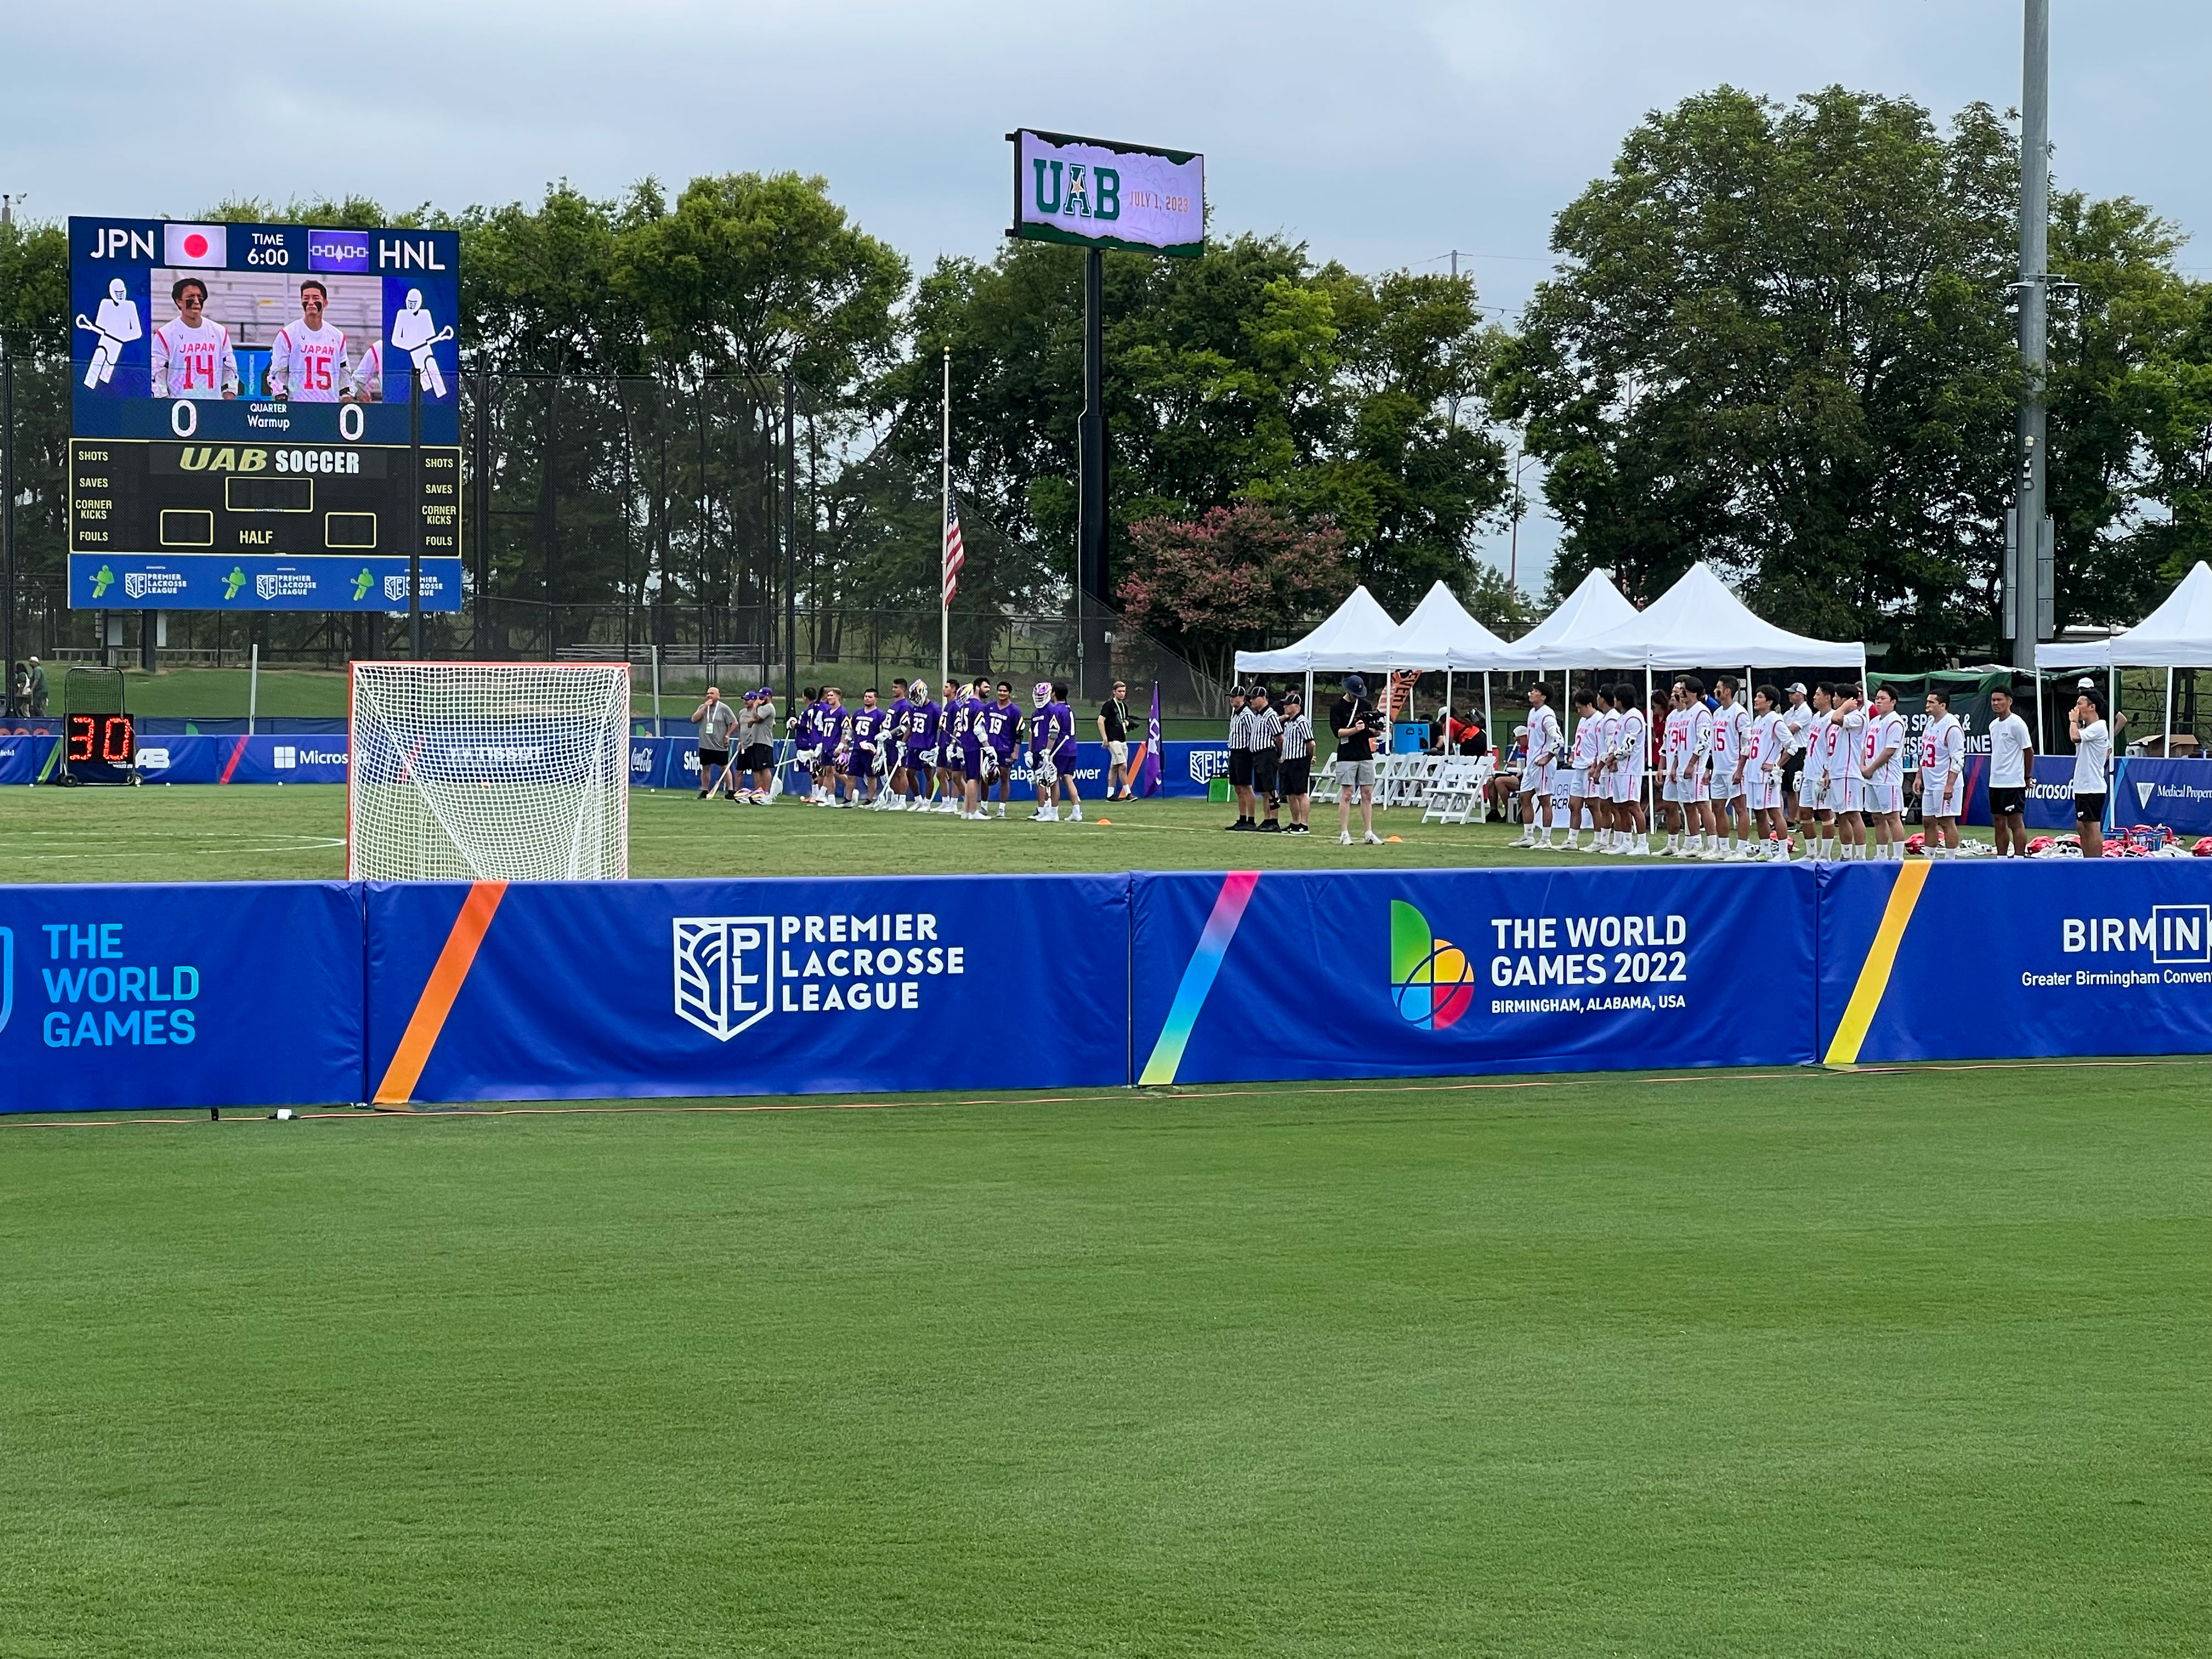 Events took place throughout Birmingham and UAB, including lacrosse at PNC Field.